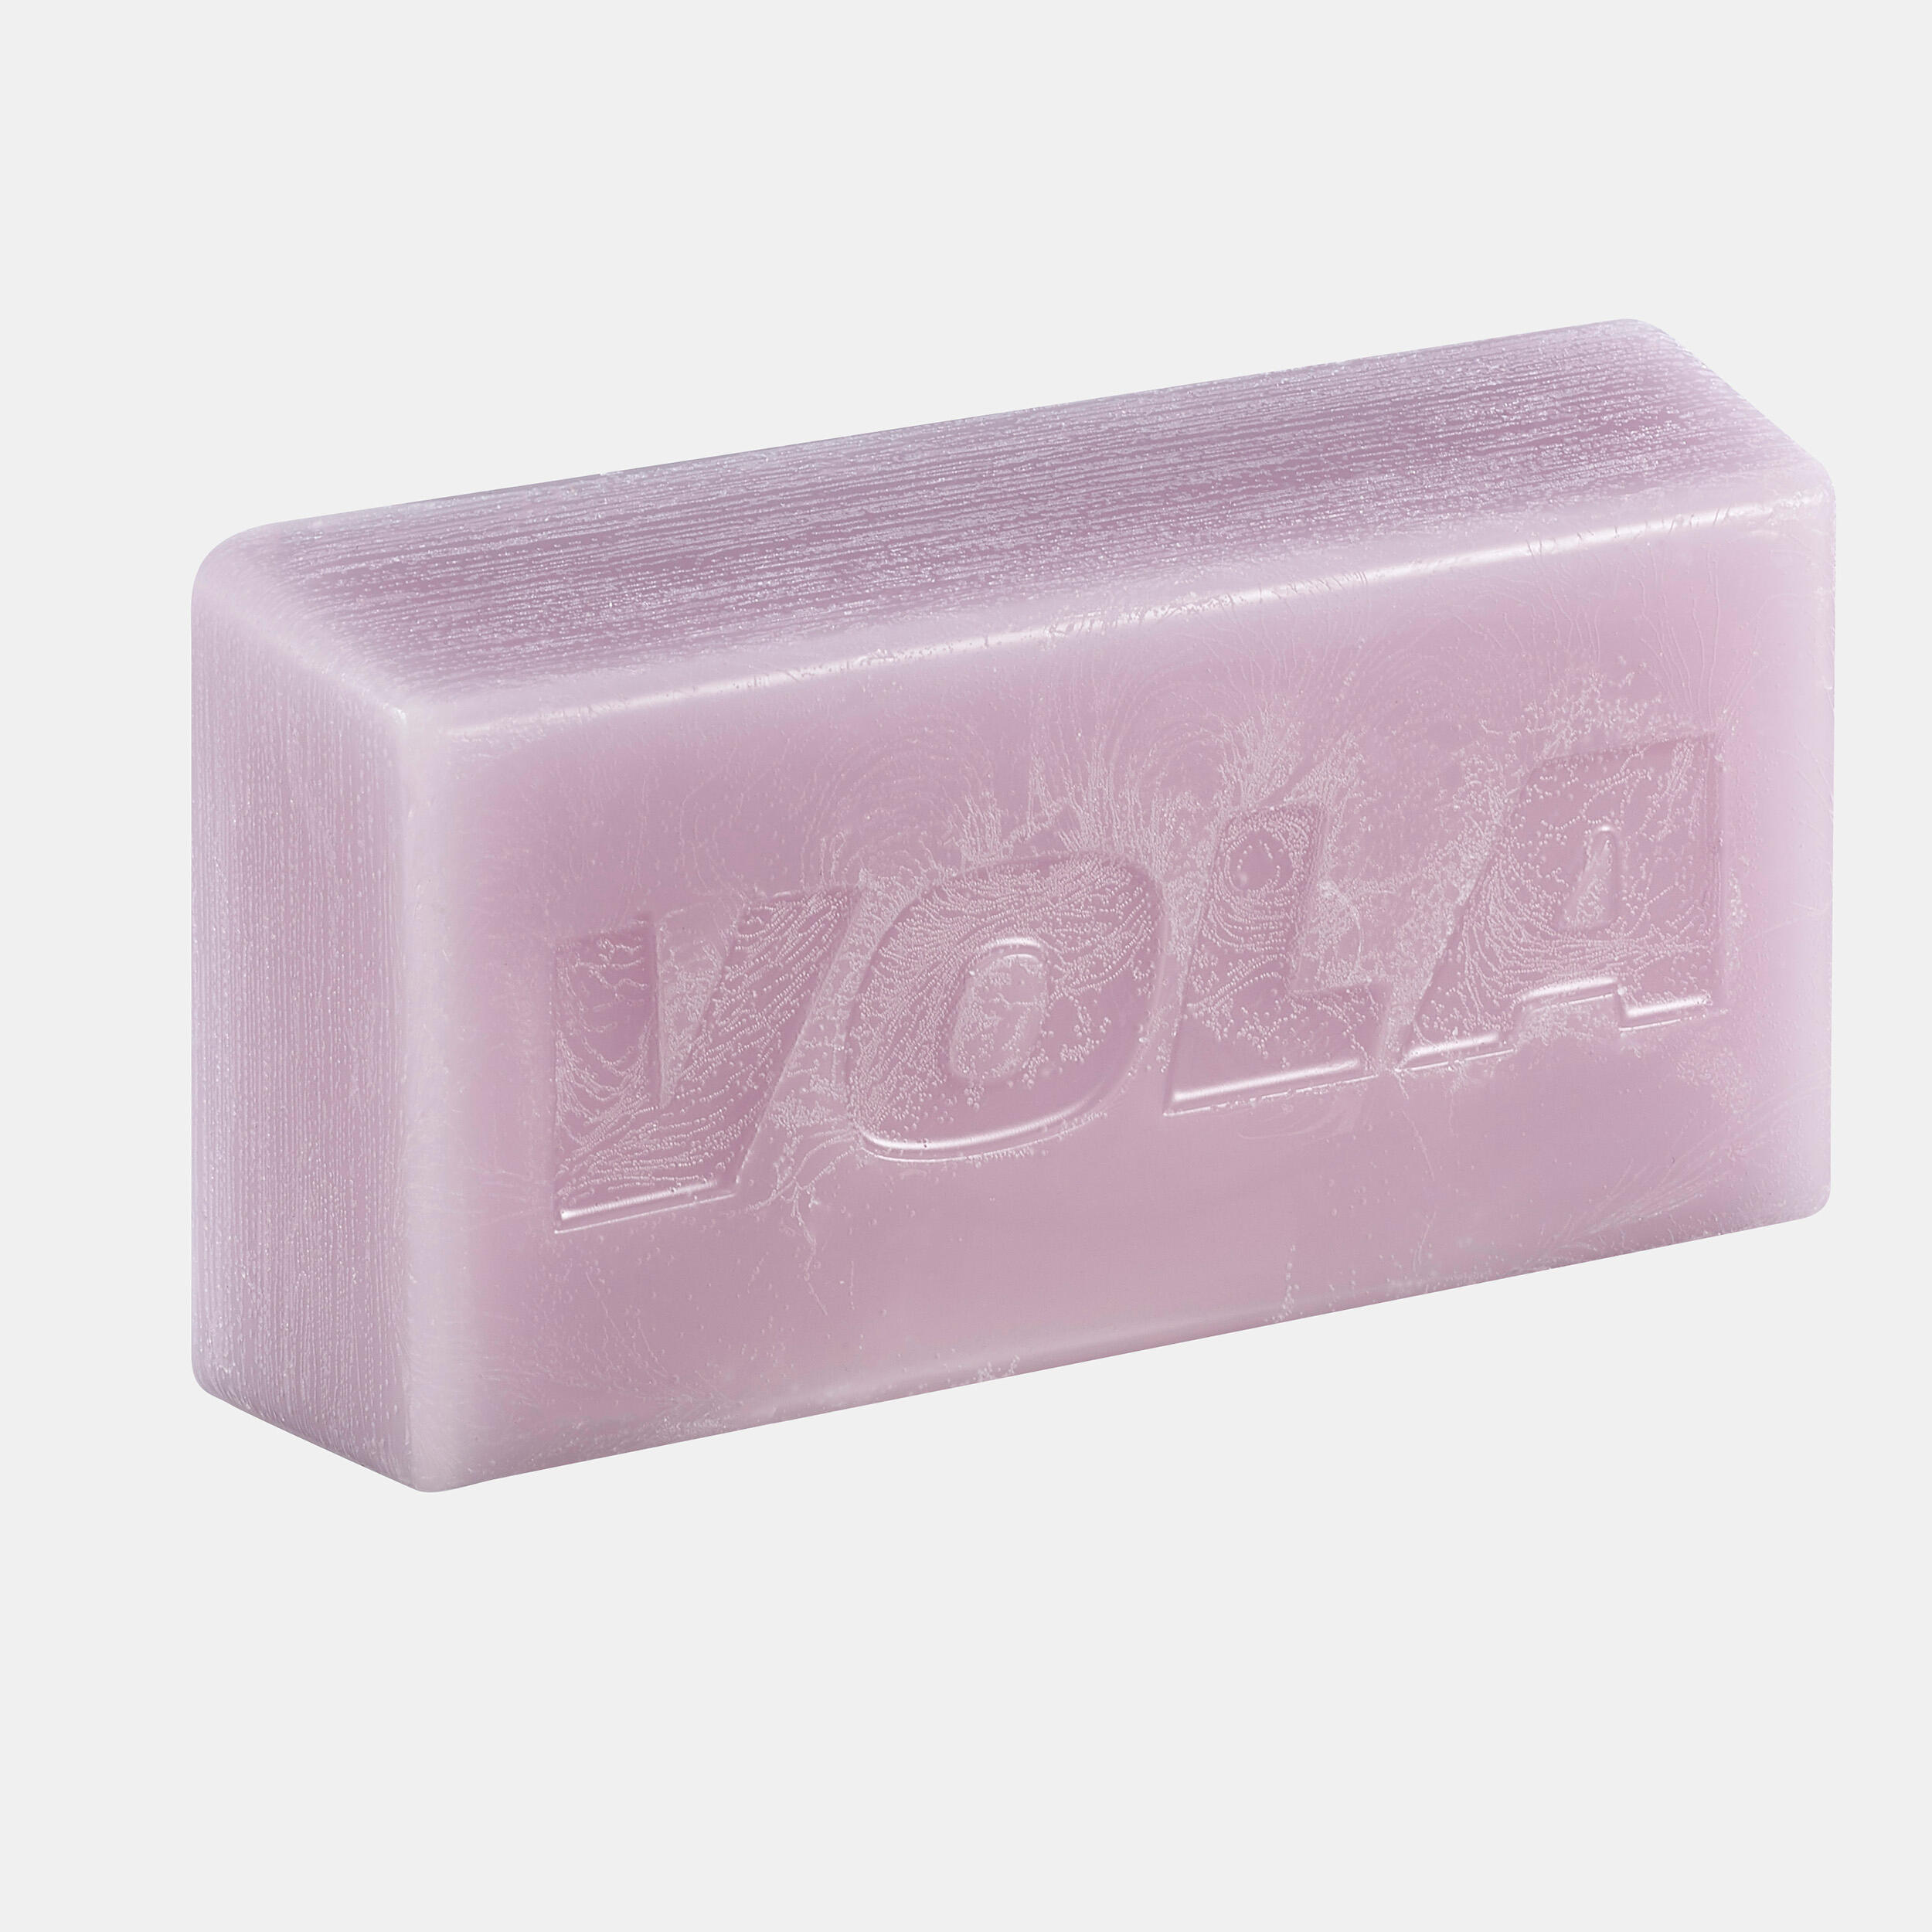 WAX MX901 200 g Vola base wax for skis or snowboards. 1/2